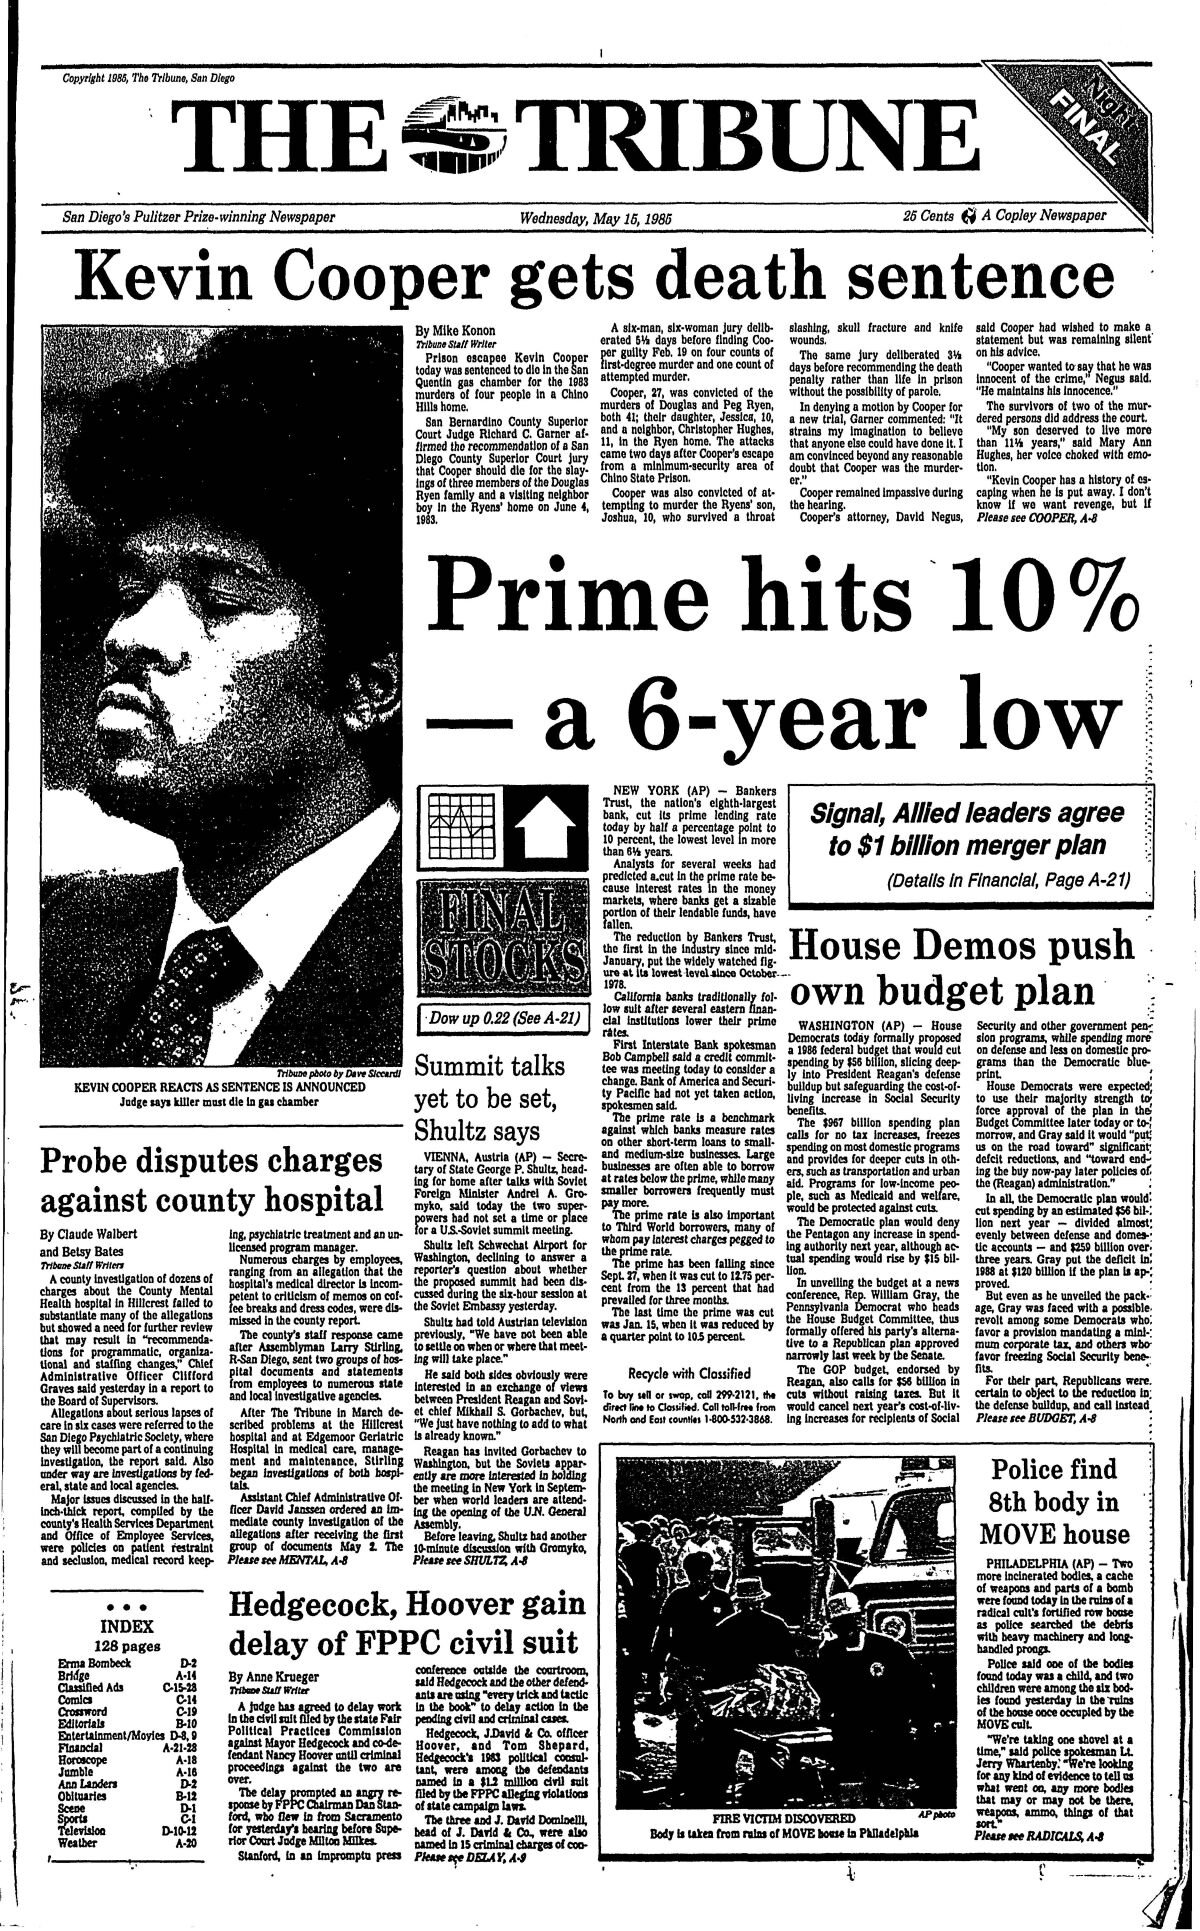 May 15, 1985 Tribune front page with sentencing for Kevin Cooper.